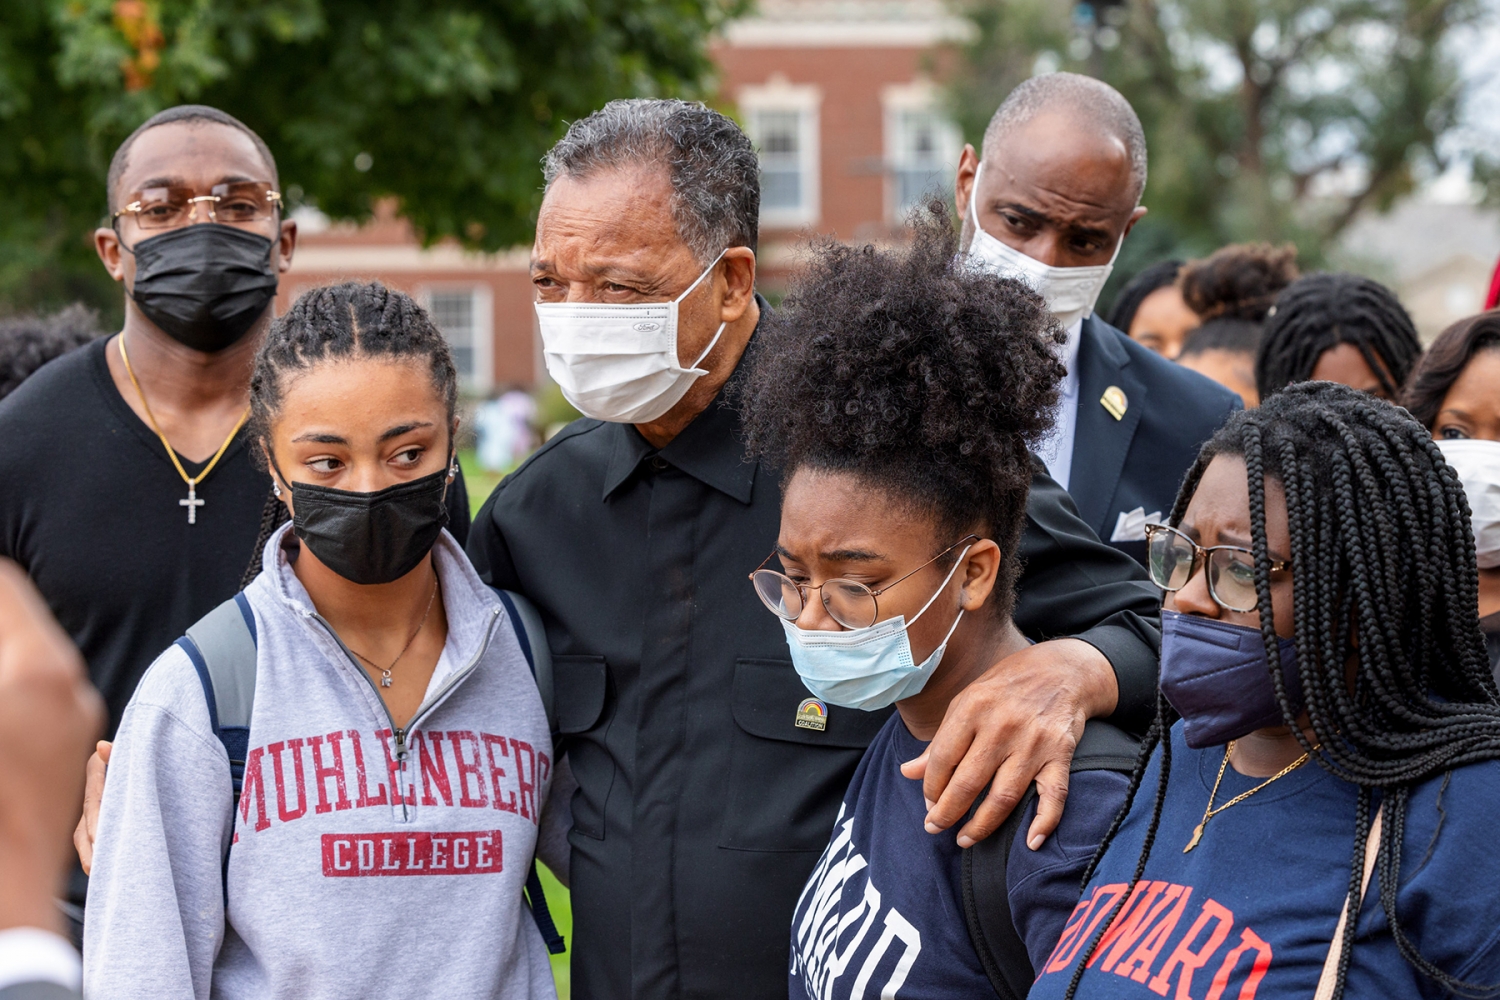 Channing Hill (second from right) and Erica England (right) headed inside of the Armour J. Blackburn Center with Rev. Jesse Jackson (center) on Sunday, Oct. 31, after Sunday’s Chapel service.